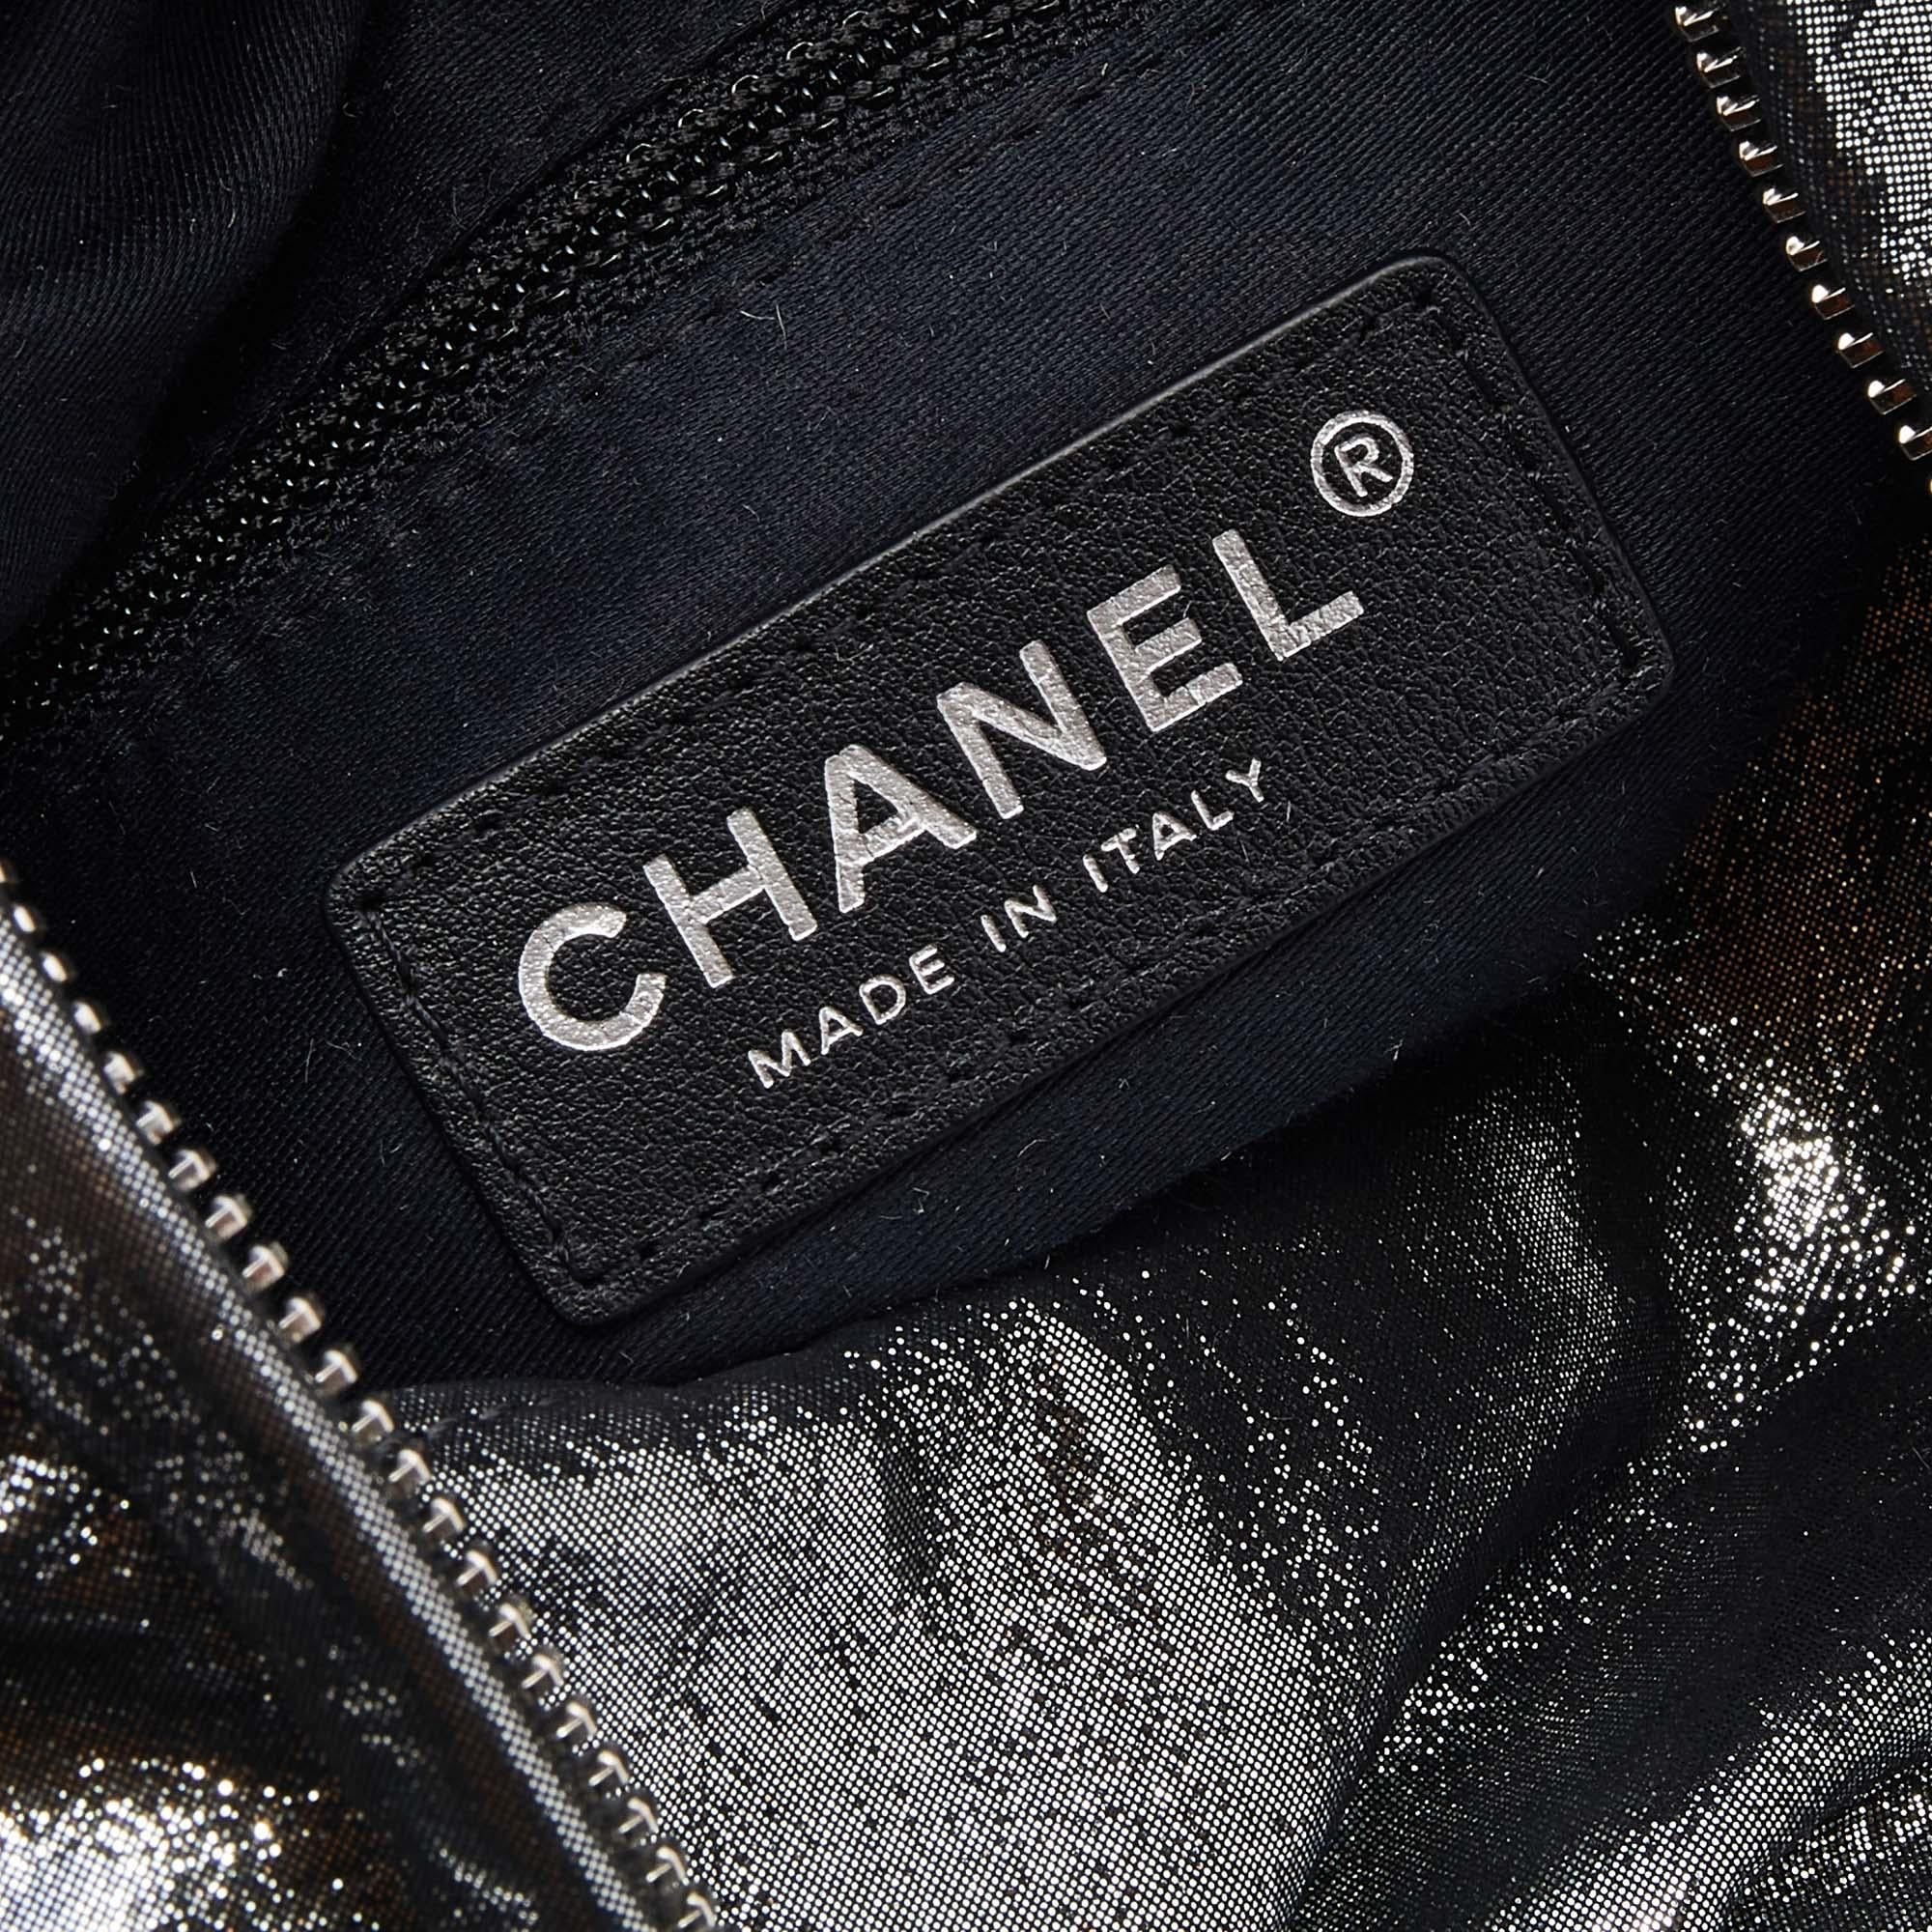 Chanel Metallic Dark Silver Quilted Leather Large Backpack is Back Backpack 3